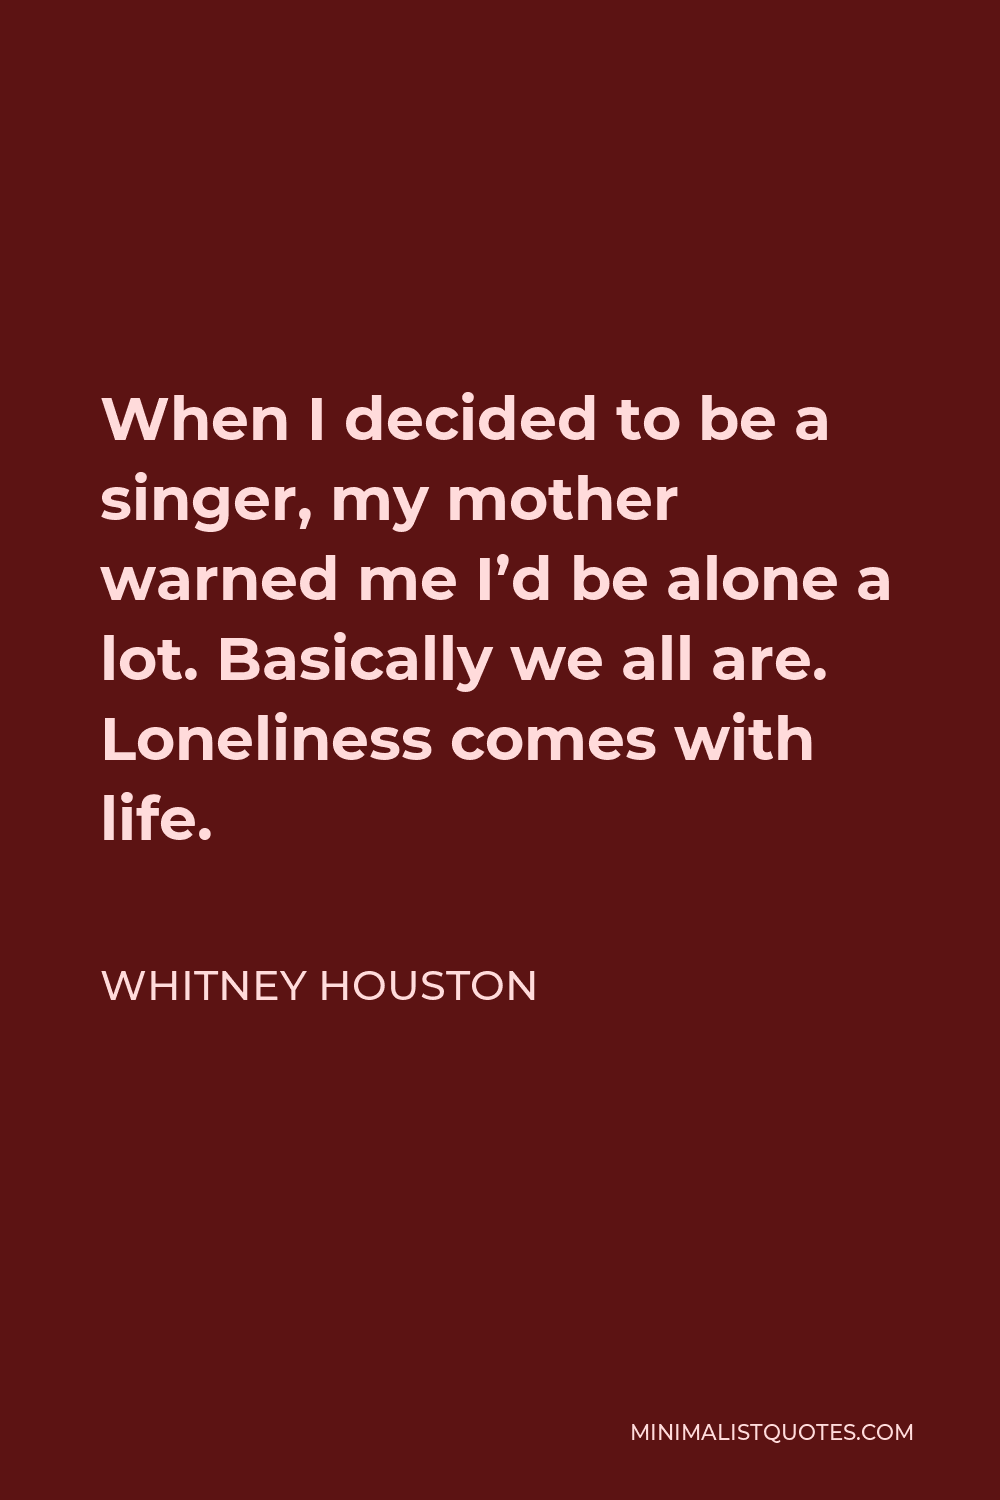 Whitney Houston Quote - When I decided to be a singer, my mother warned me I’d be alone a lot. Basically we all are. Loneliness comes with life.